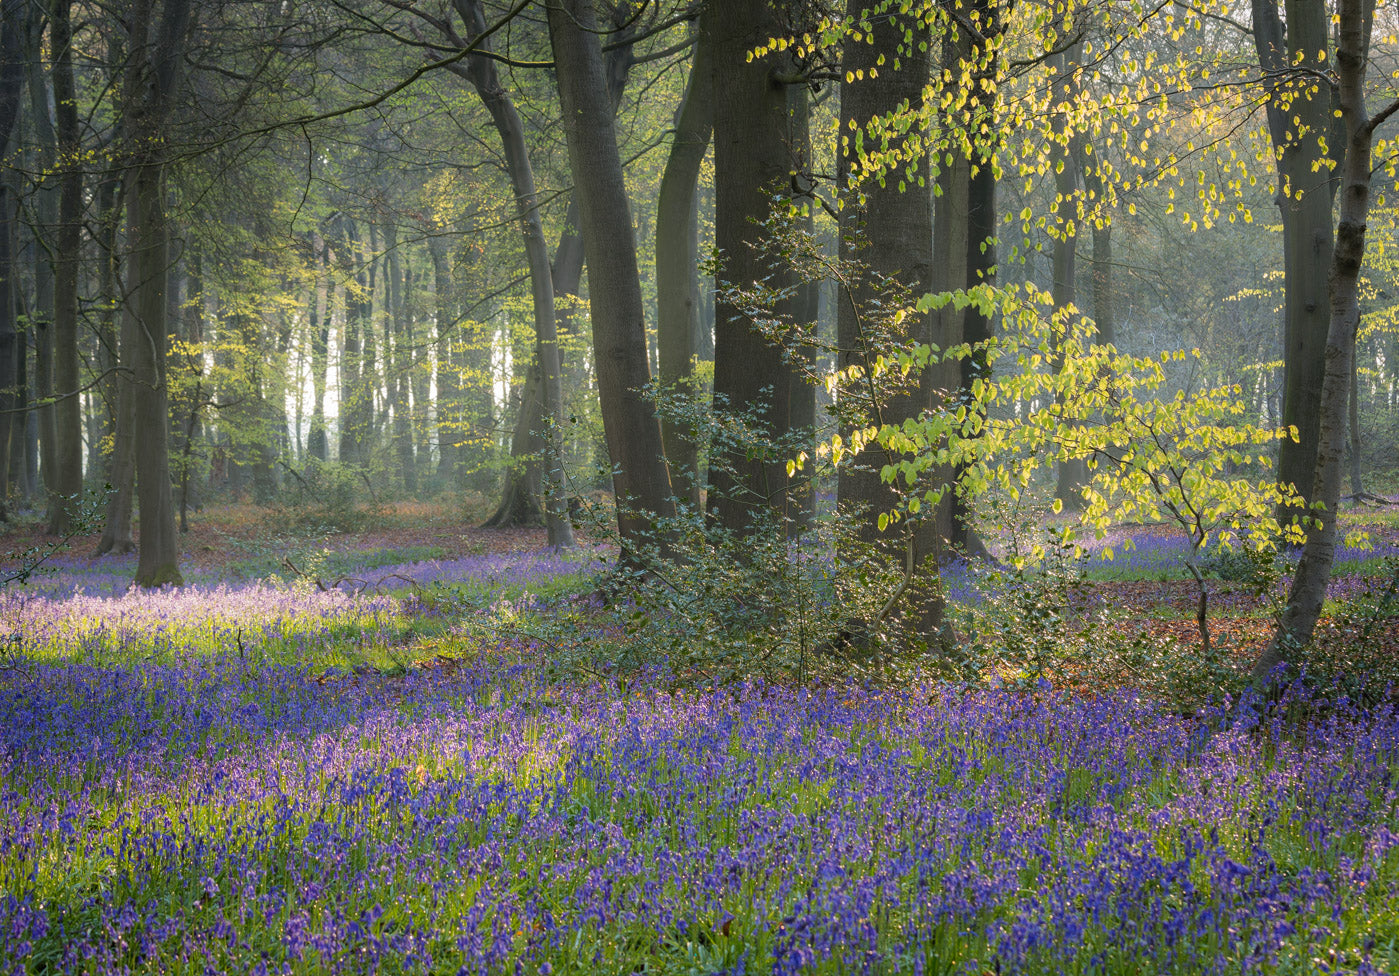 "Bluebells and Beech, Nuffield" - Wendy Reed